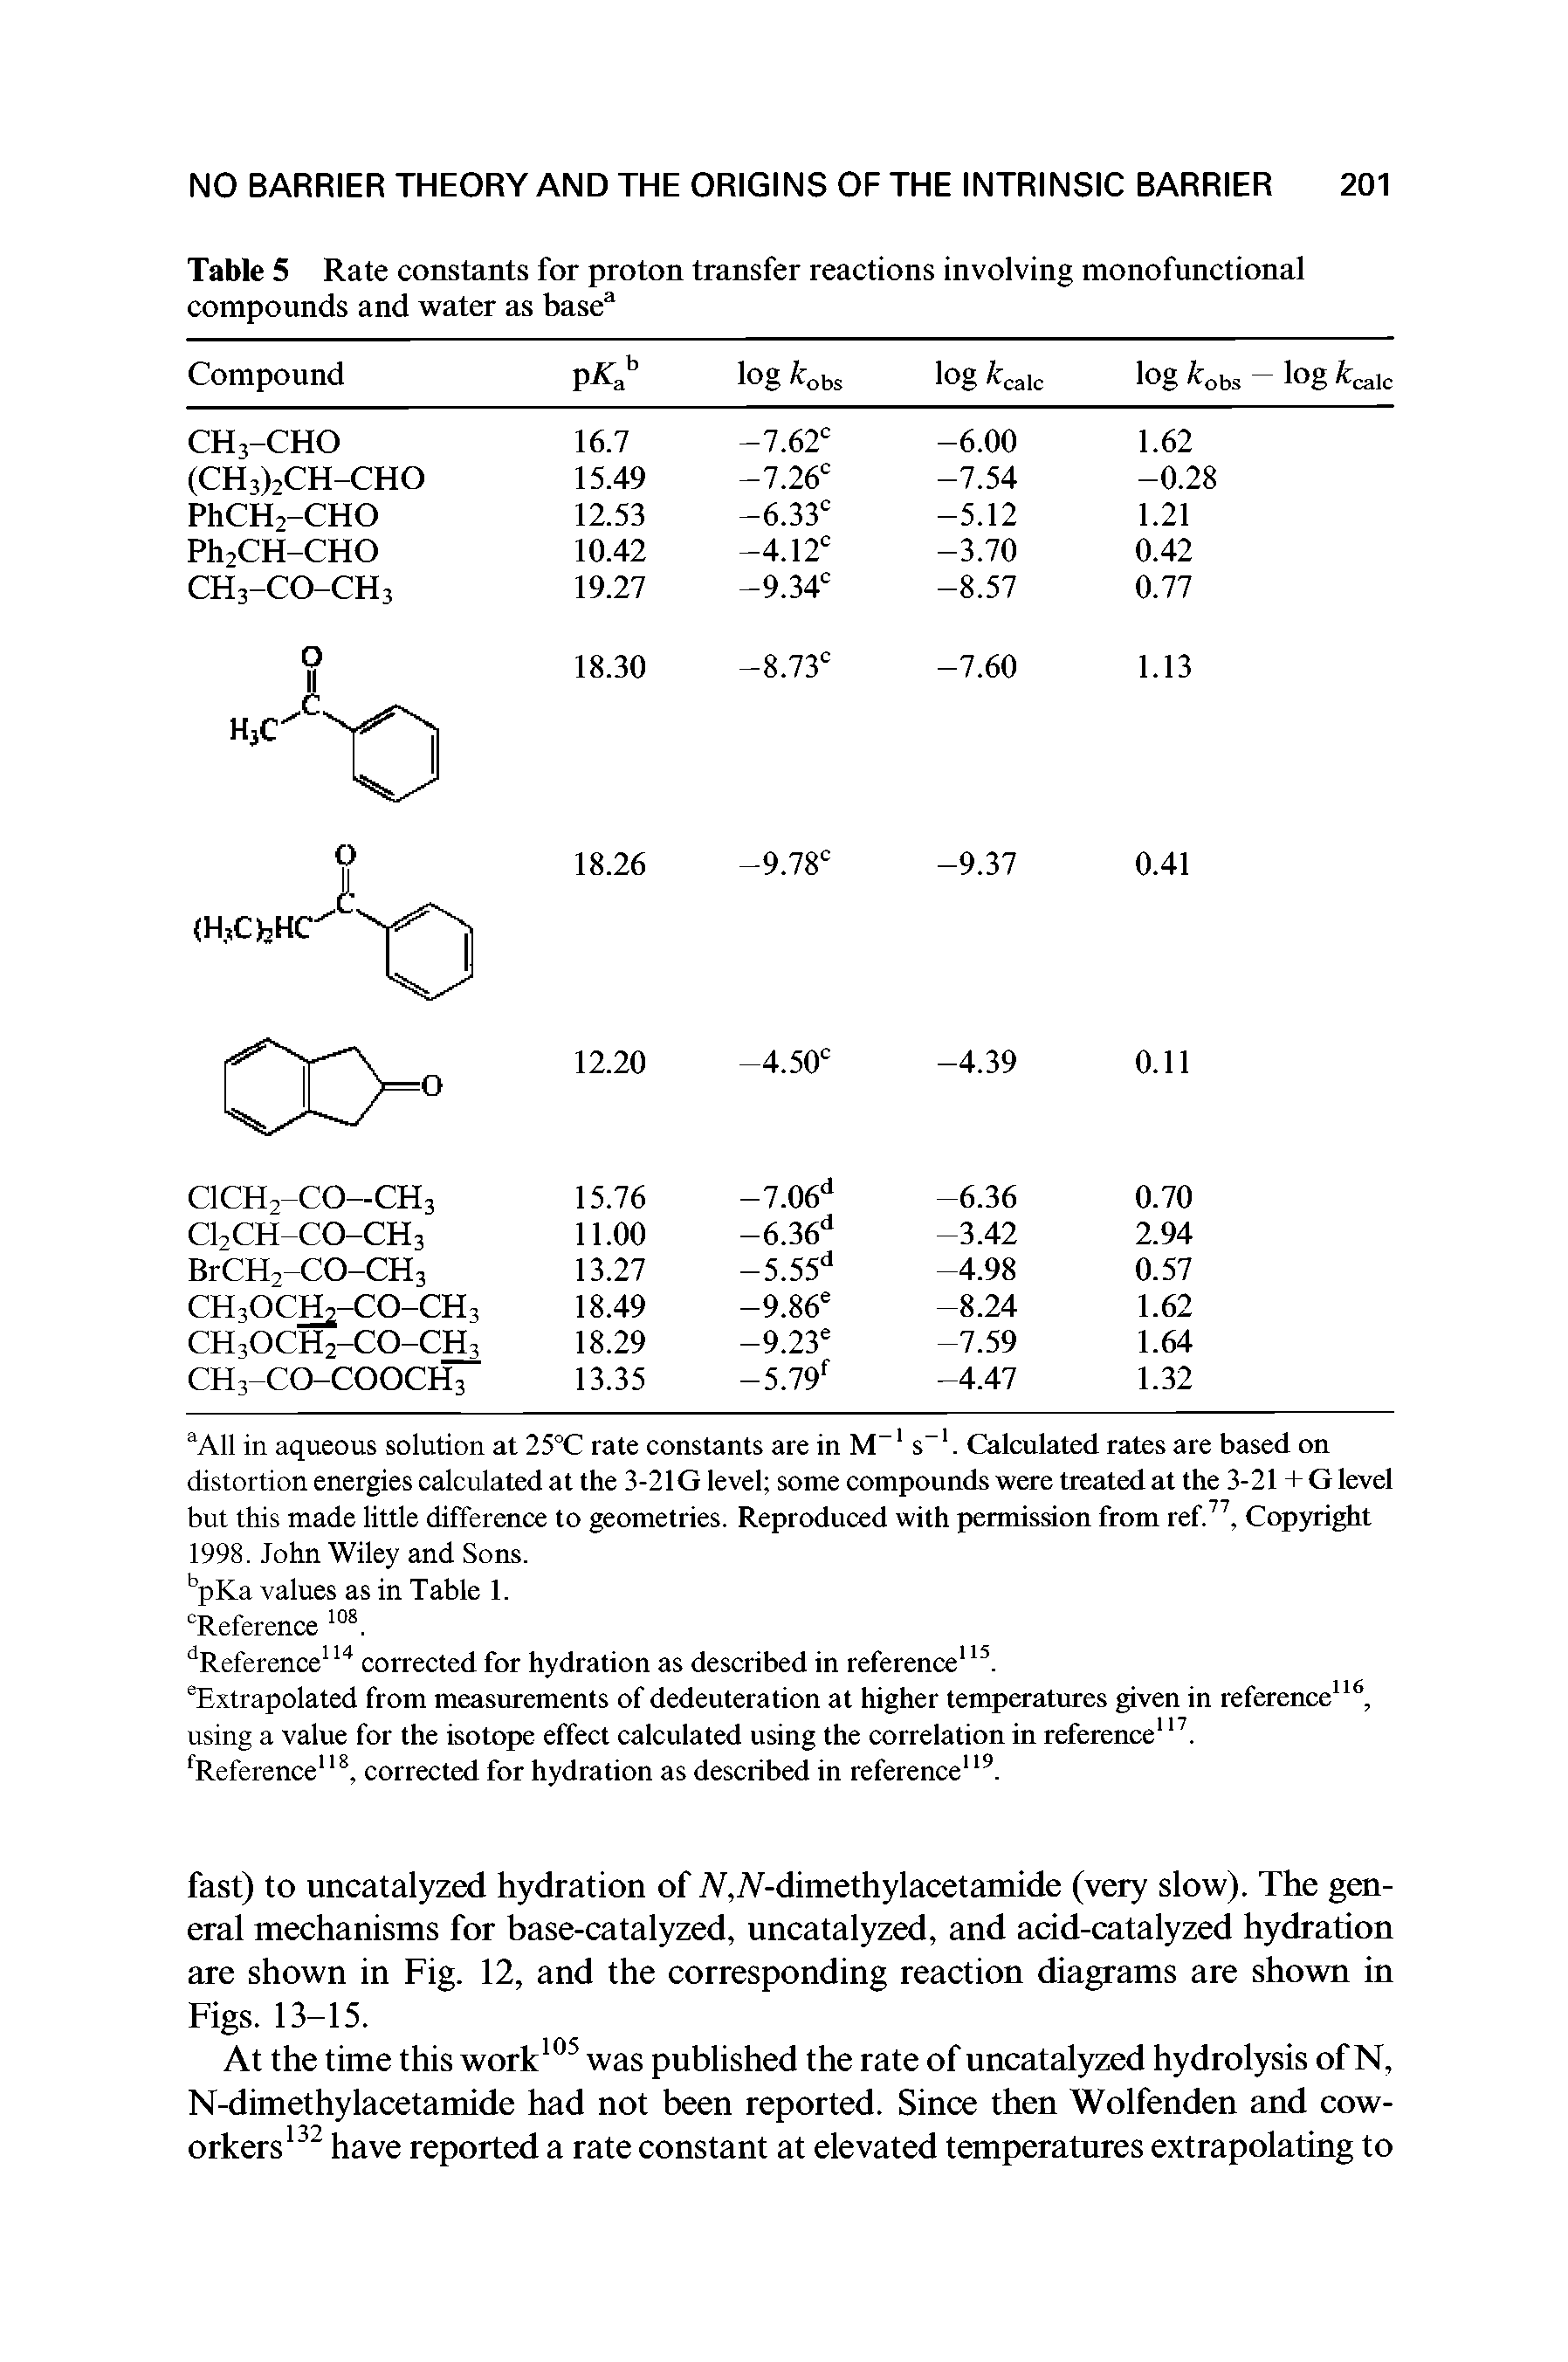 Table 5 Rate constants for proton transfer reactions involving monofunctional compounds and water as base ...